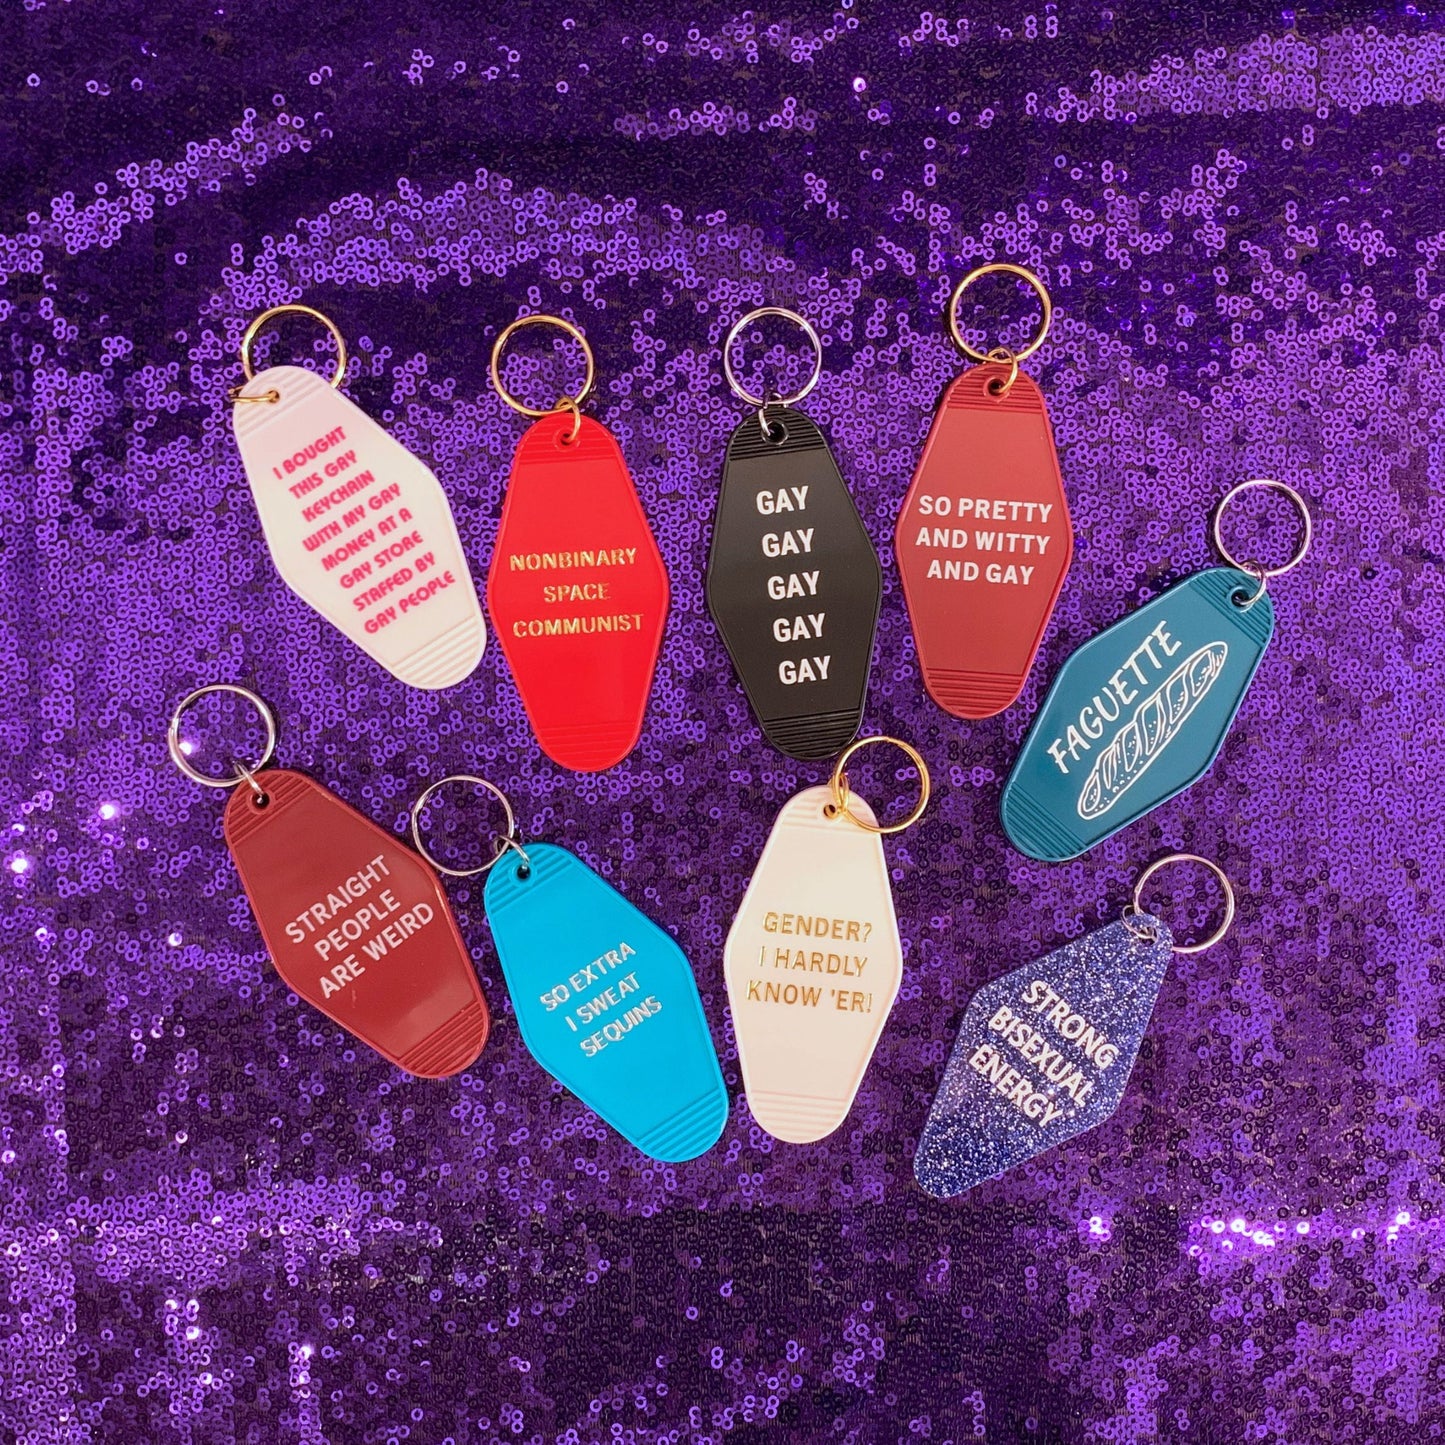 Nonbinary Space Communist Motel Style Keychain in Red and Gold